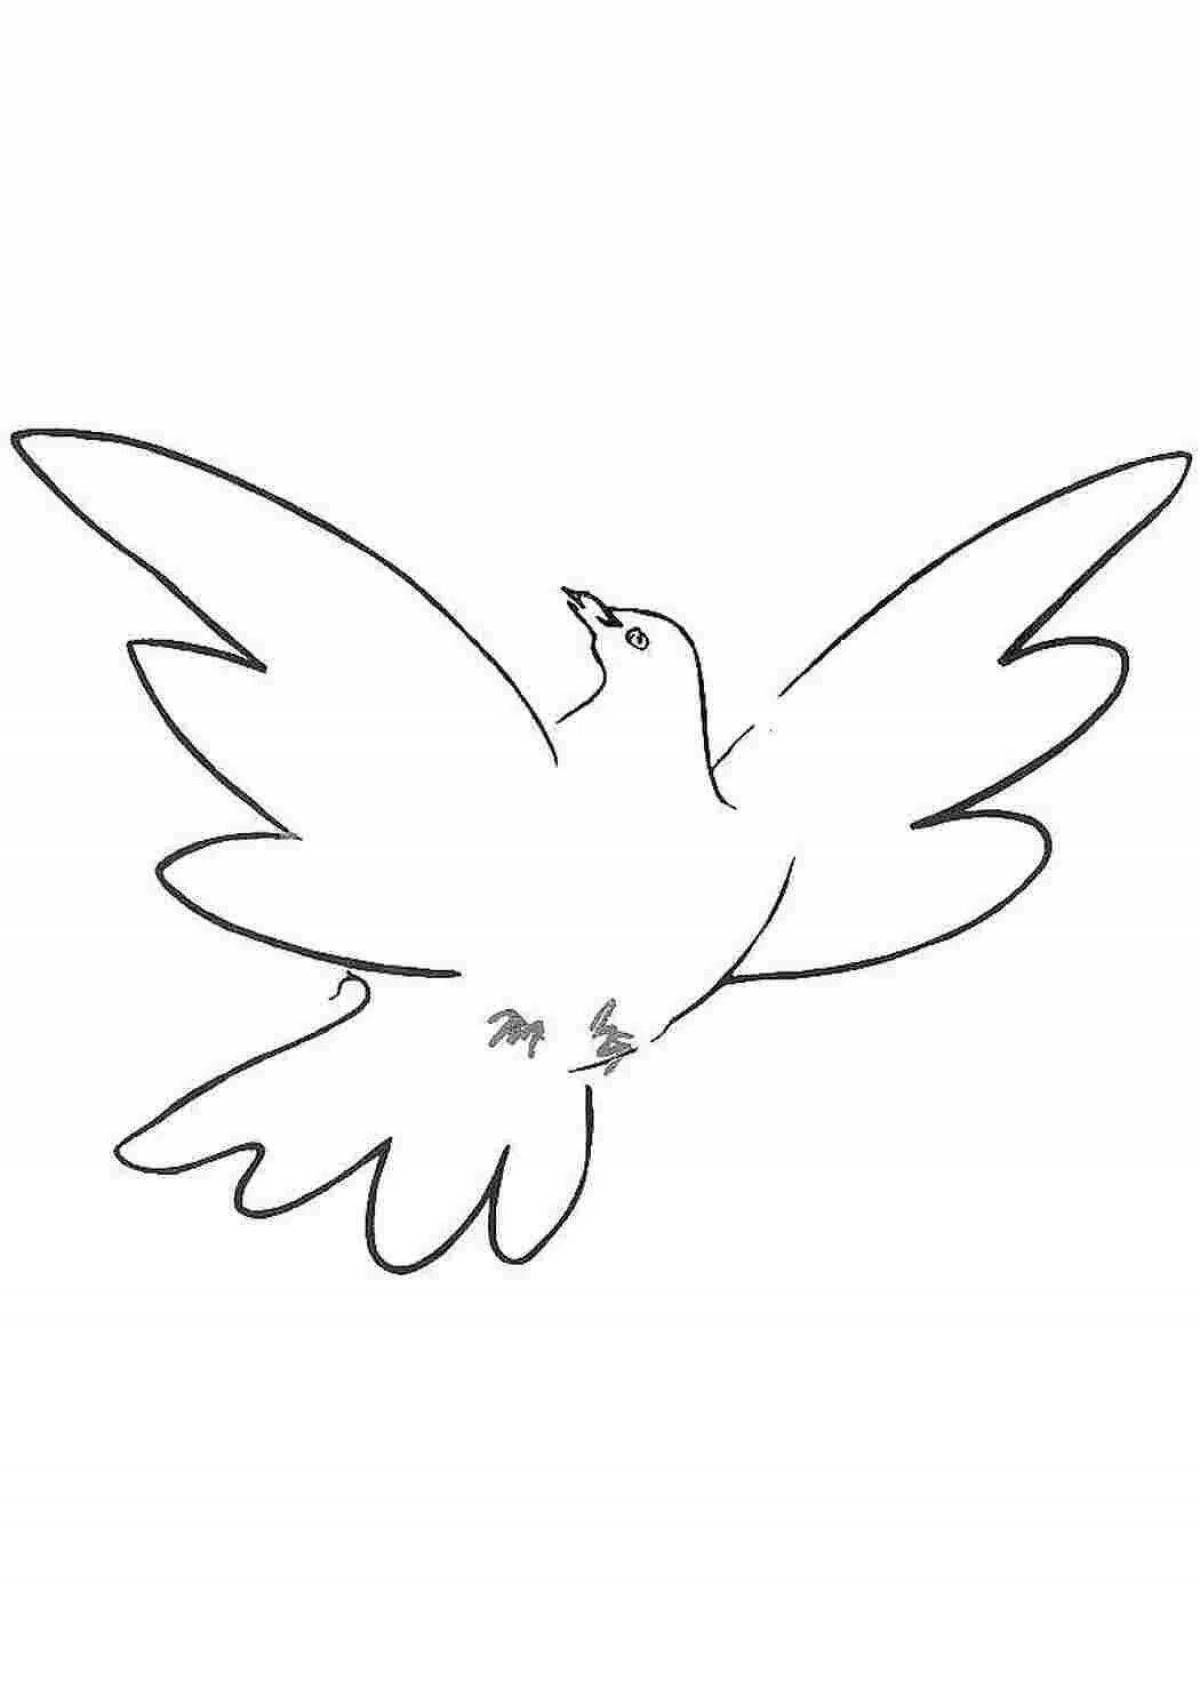 Coloring book glowing white dove